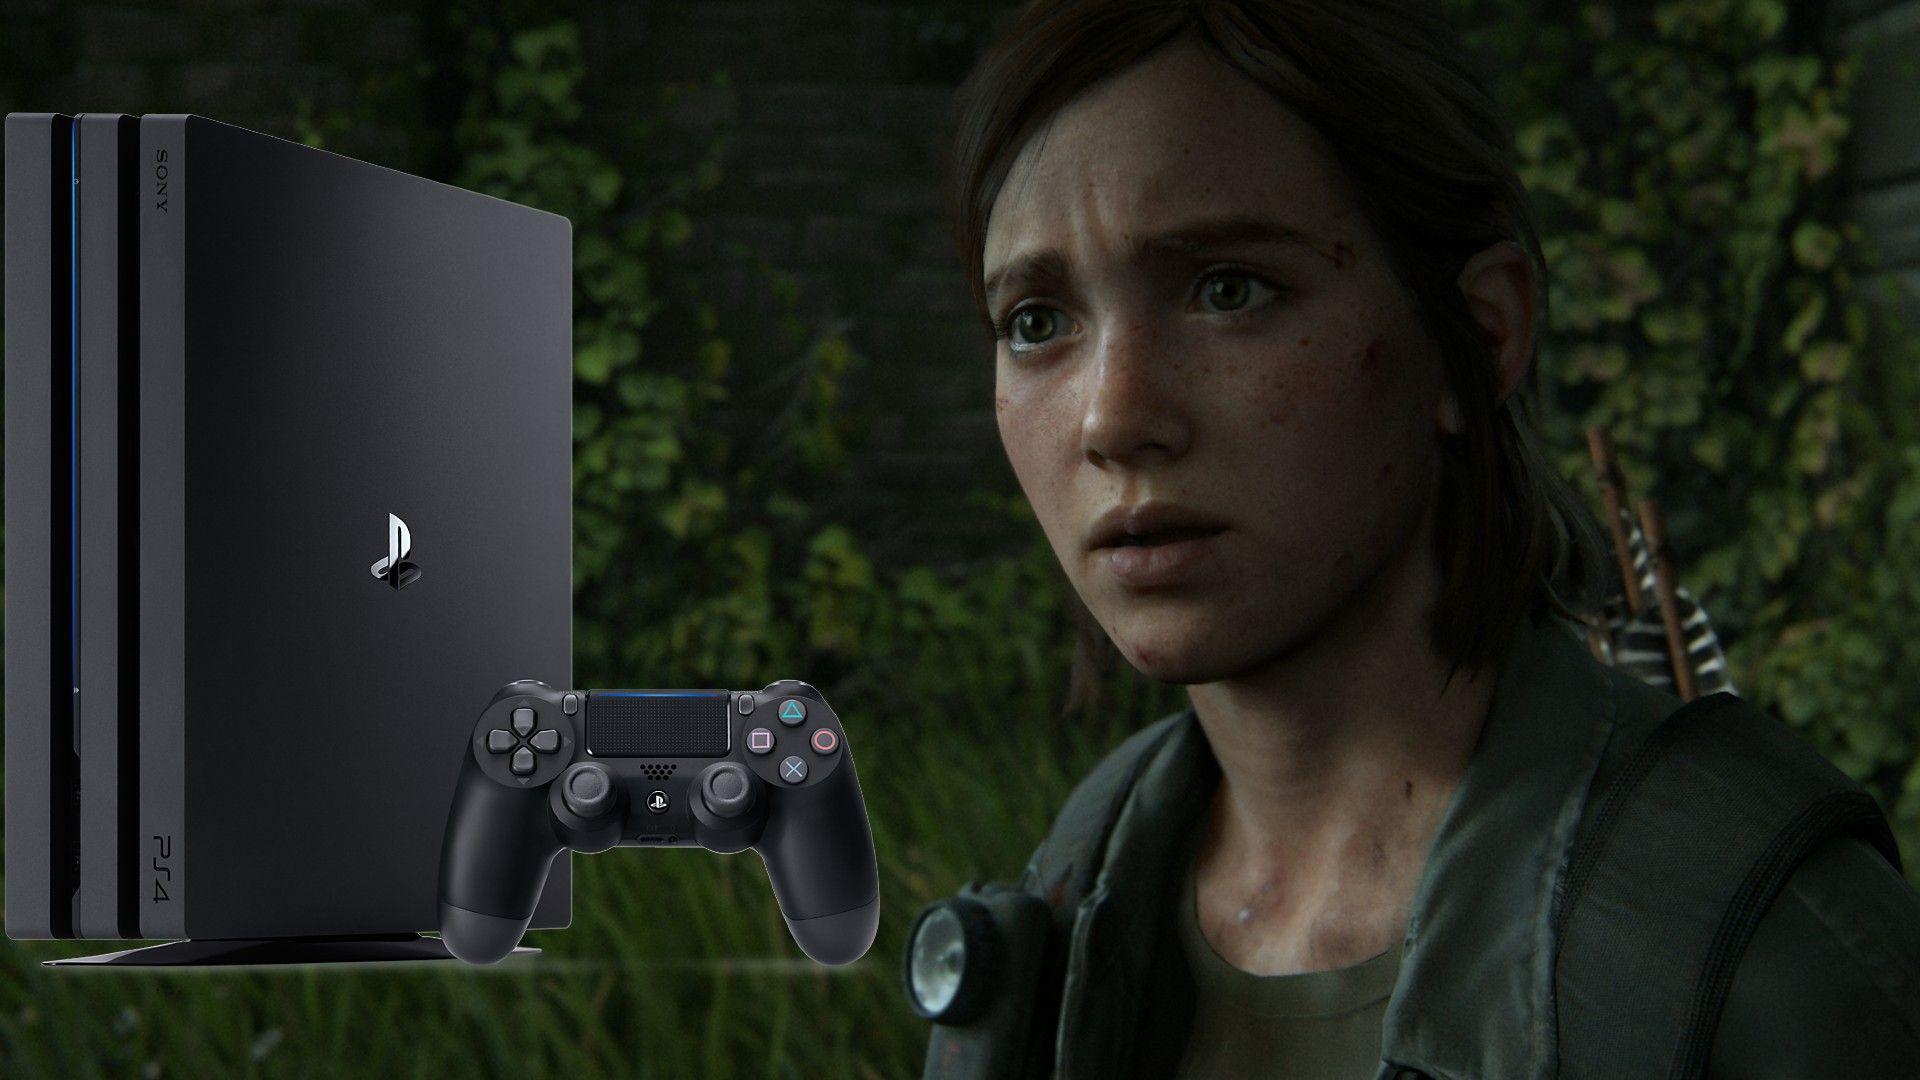 ps4 exclusive tournament, best exclusive game, the last of us 2